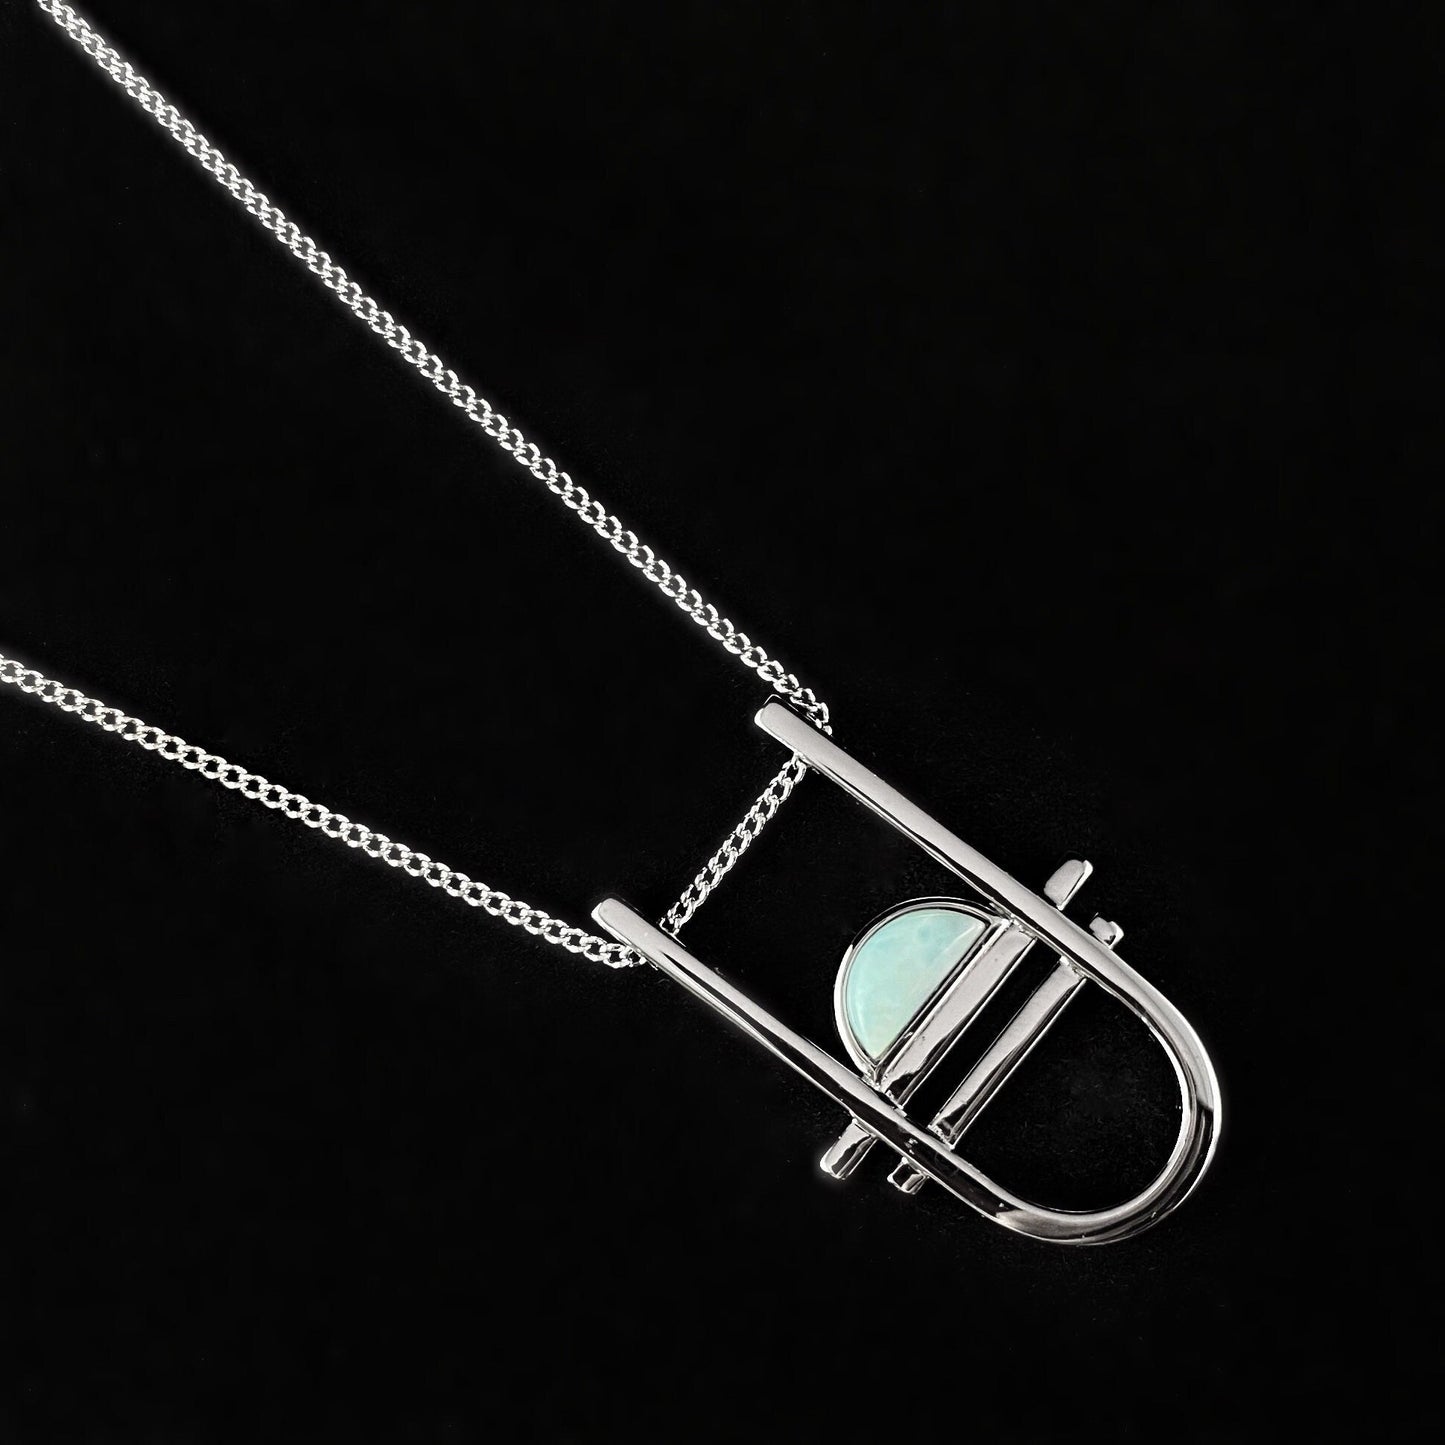 1920s Silver Art Deco Necklace with Natural Blue Larimar Stone - Carlyle